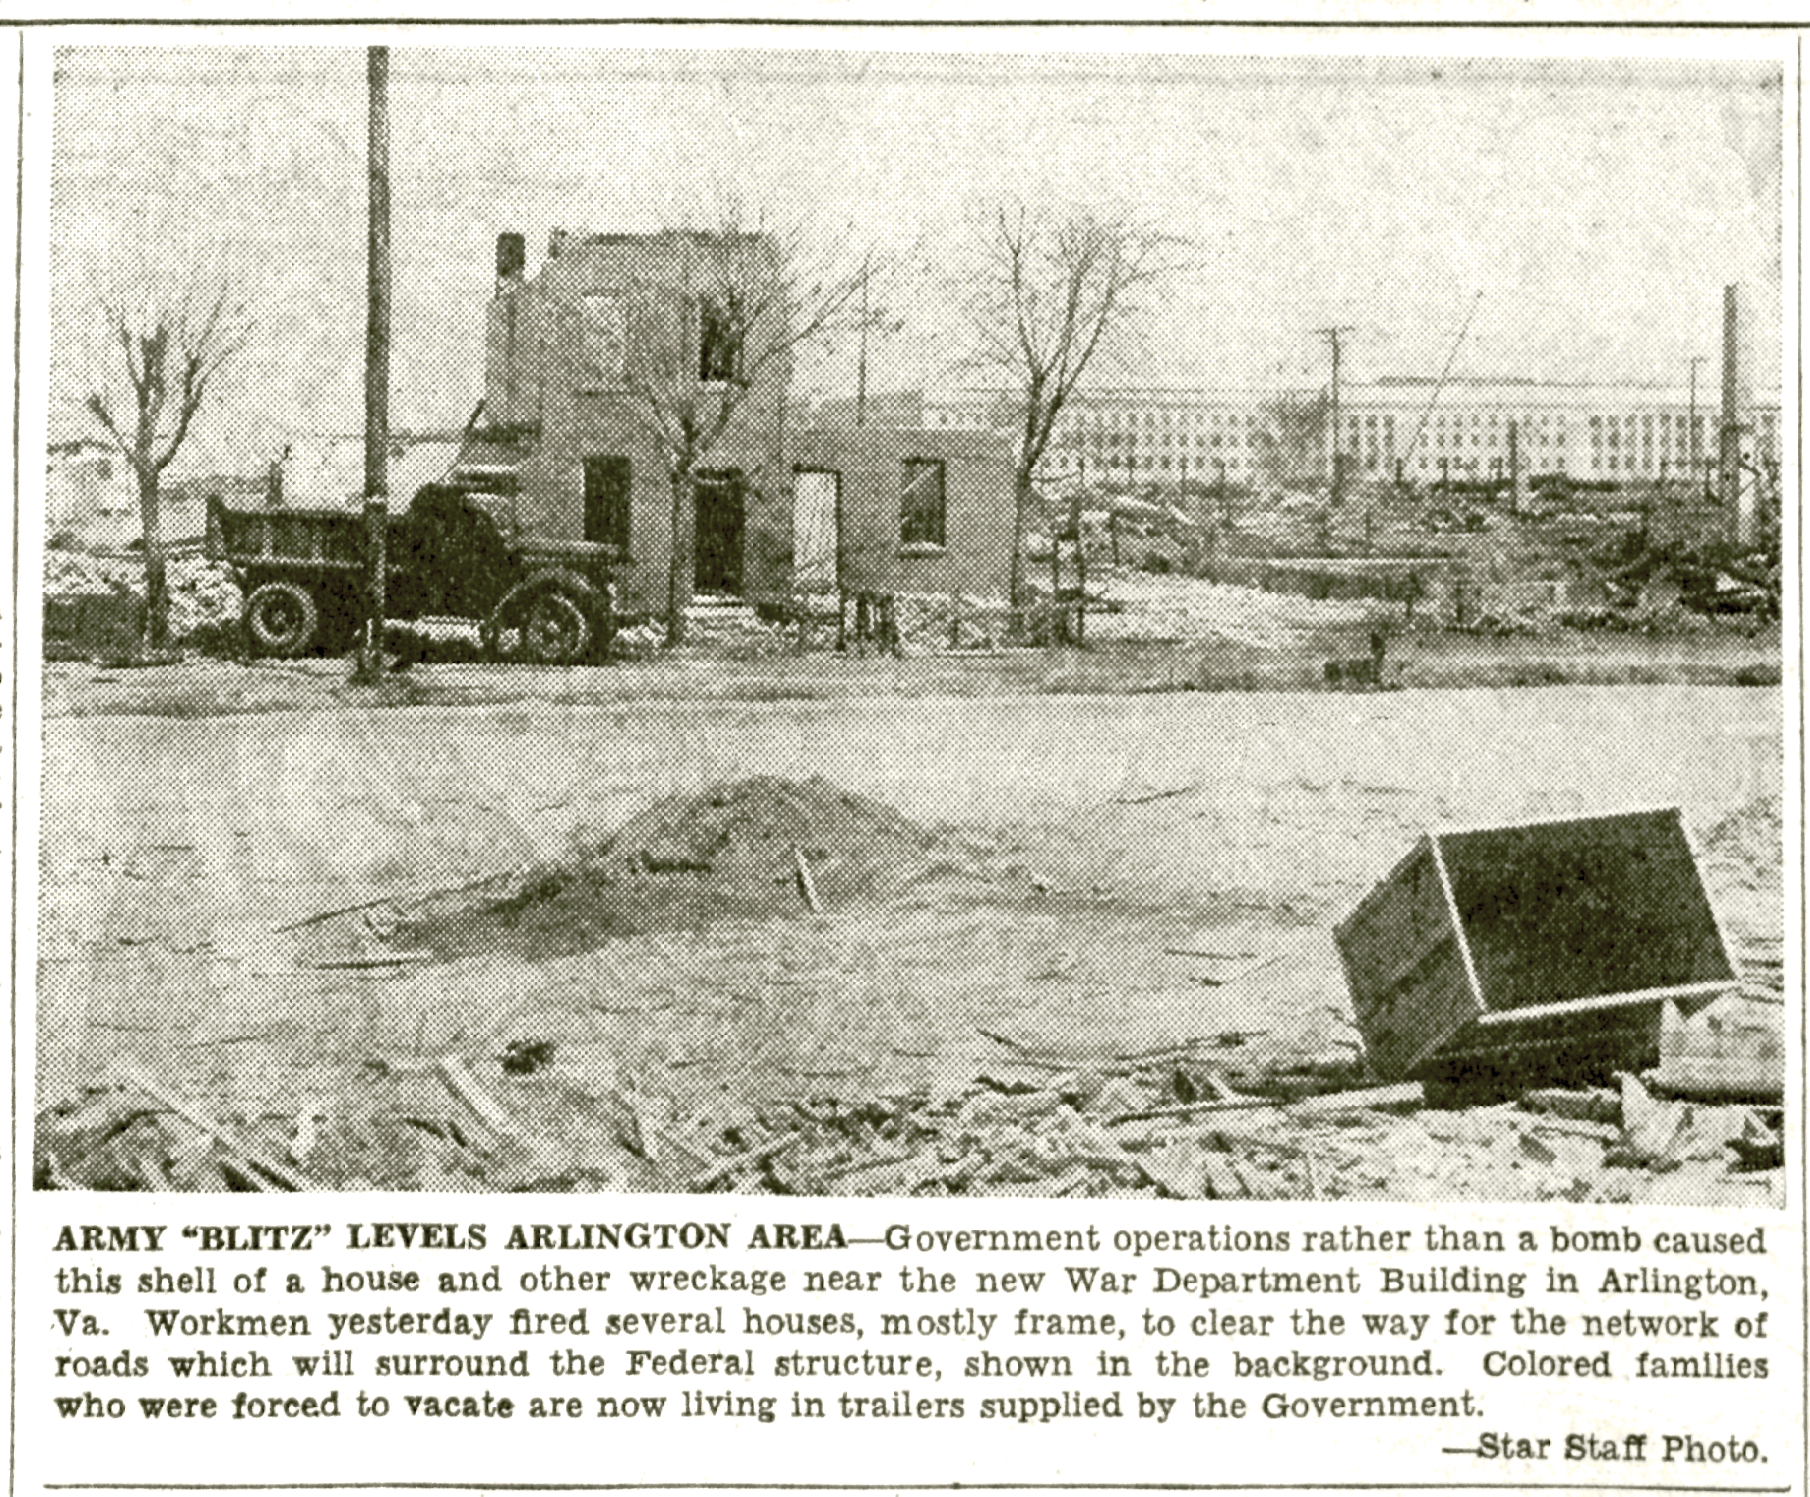 “Army ‘Blitz’ Levels Arlington Area,” this photo, from the April 18, 1942 edition of the Washington Star, features the shell of a house being removed to make way for roads that would surround the Pentagon which is seen in the background. DC Public Library, Star Collection © Washington Post.